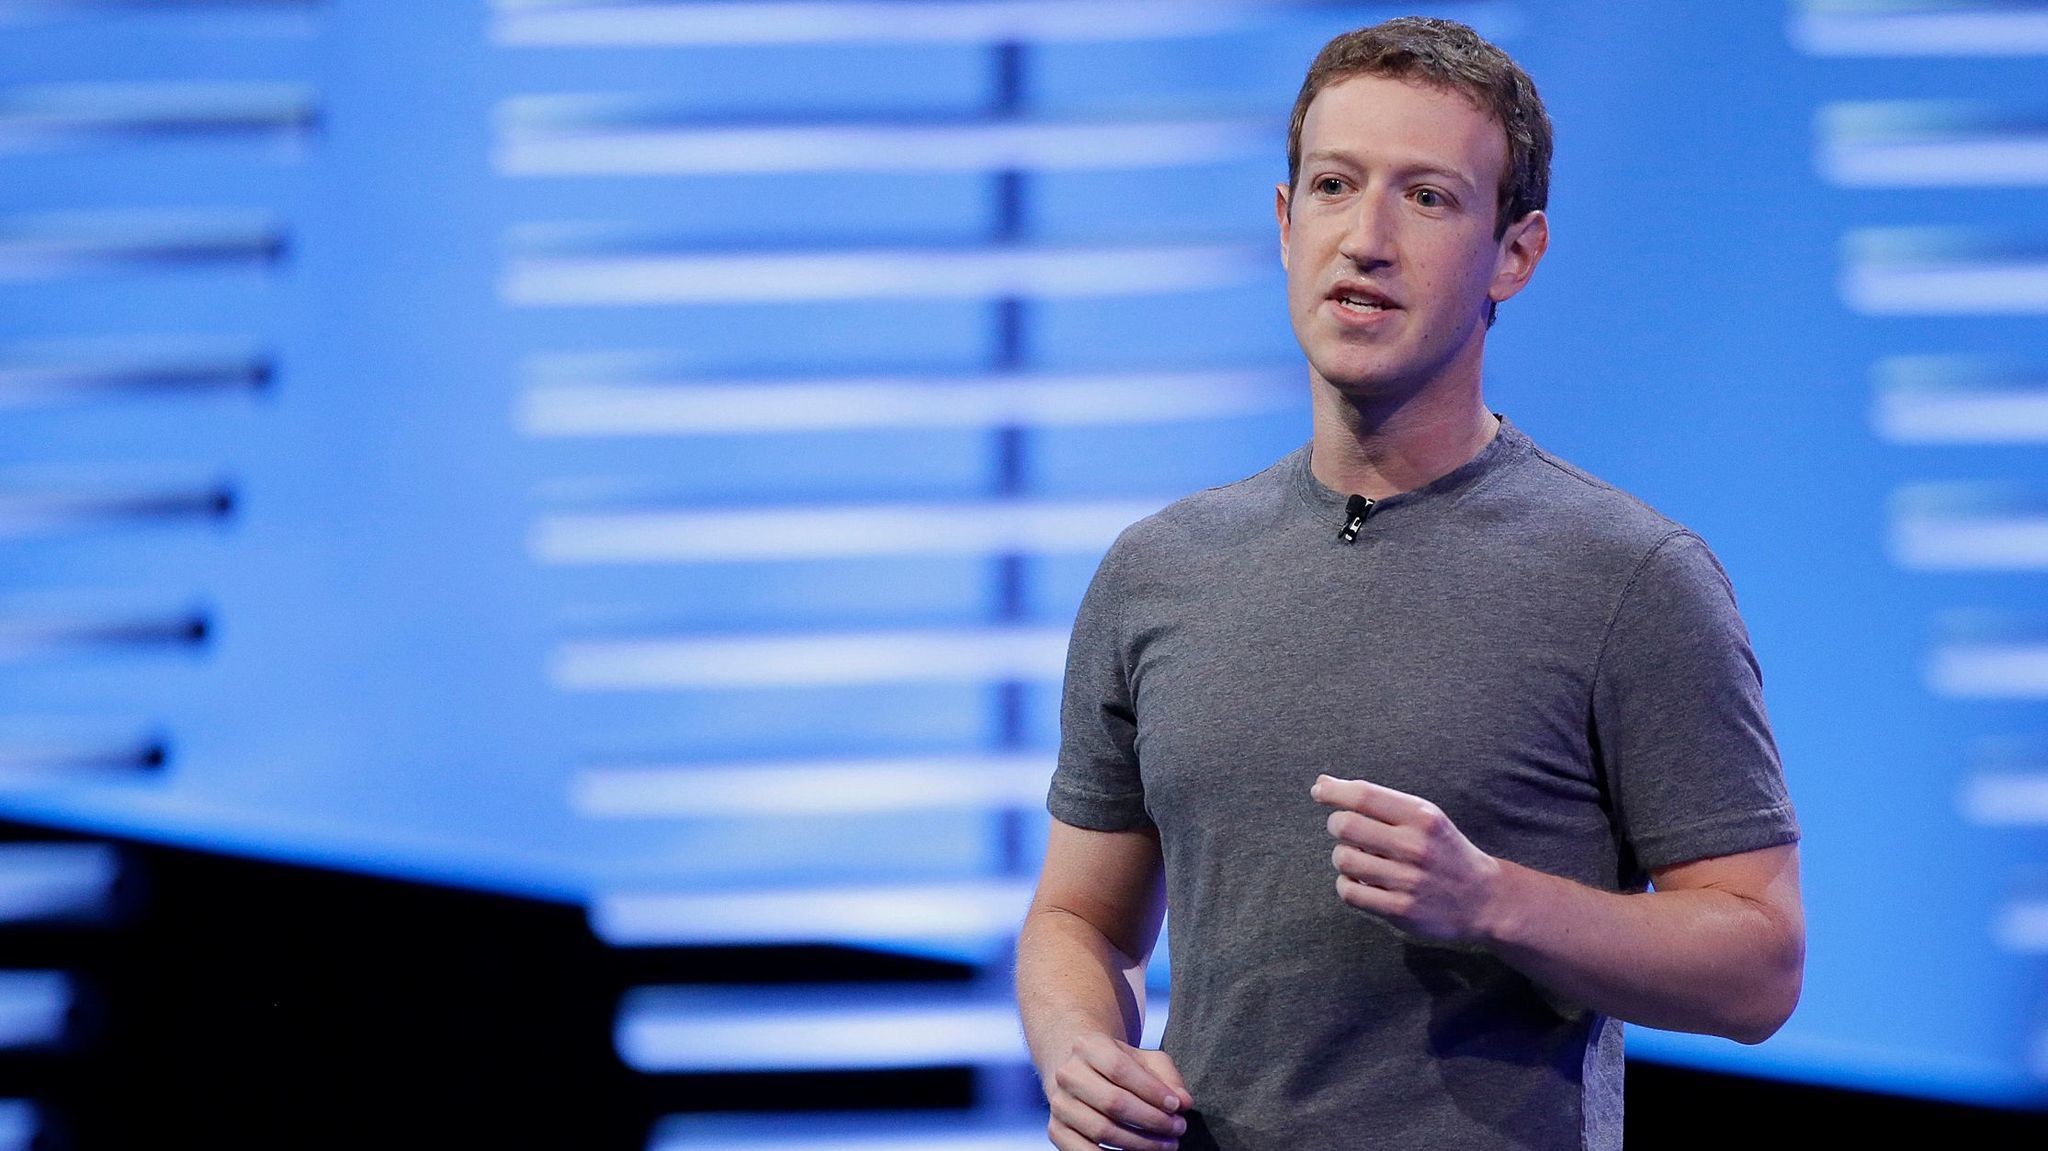 Facebook Chief Executive Mark Zuckerberg speaks during the keynote address at the F8 Facebook Developer Conference in San Francisco on April 12, 2016.